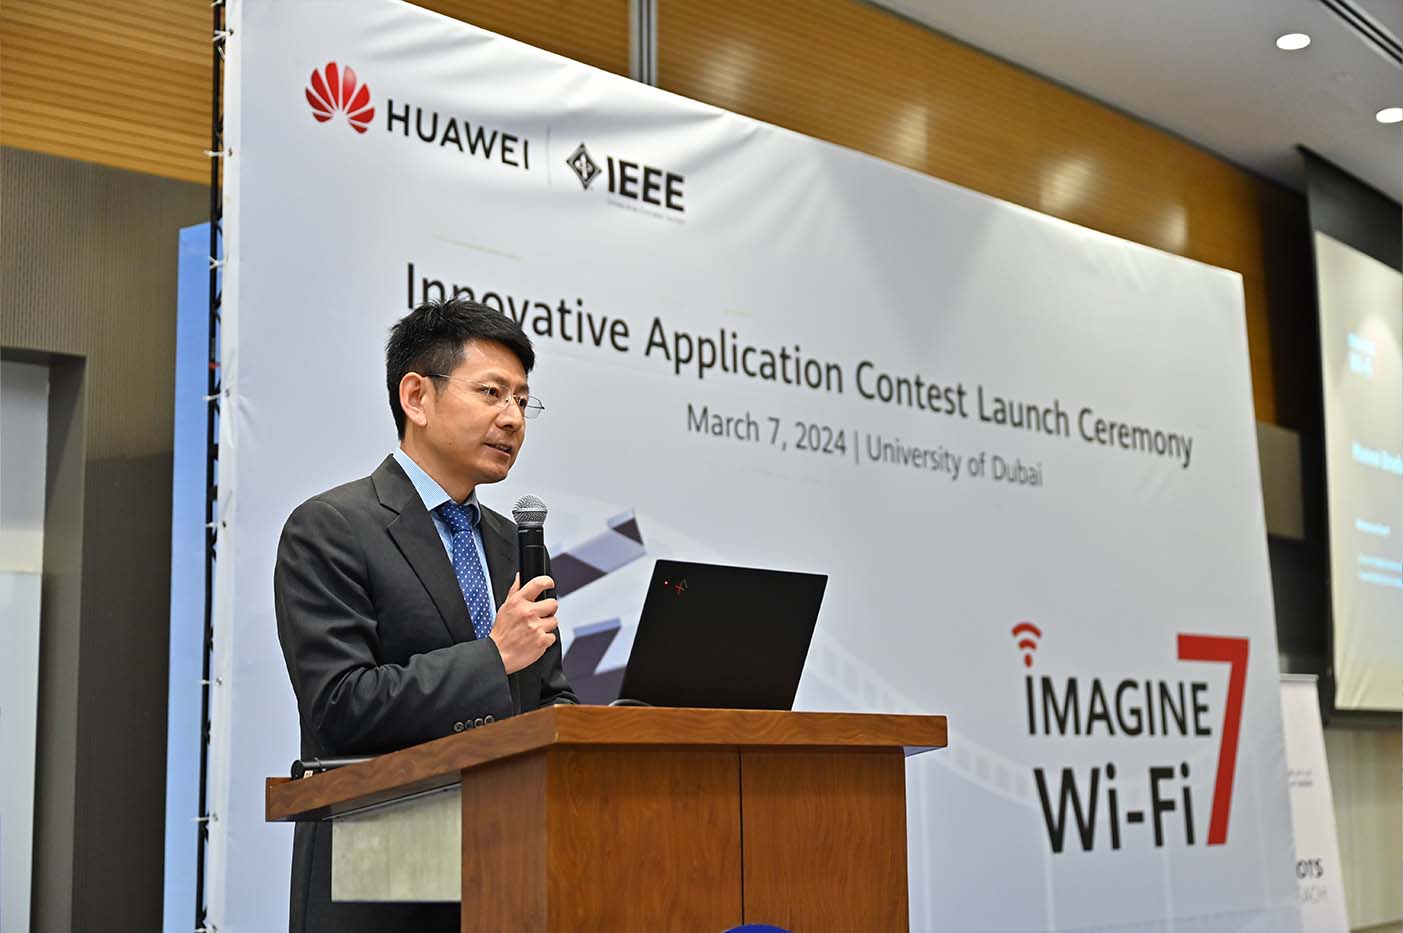 Shunli Wang, Vice President of Huawei Middle East & Central Asia